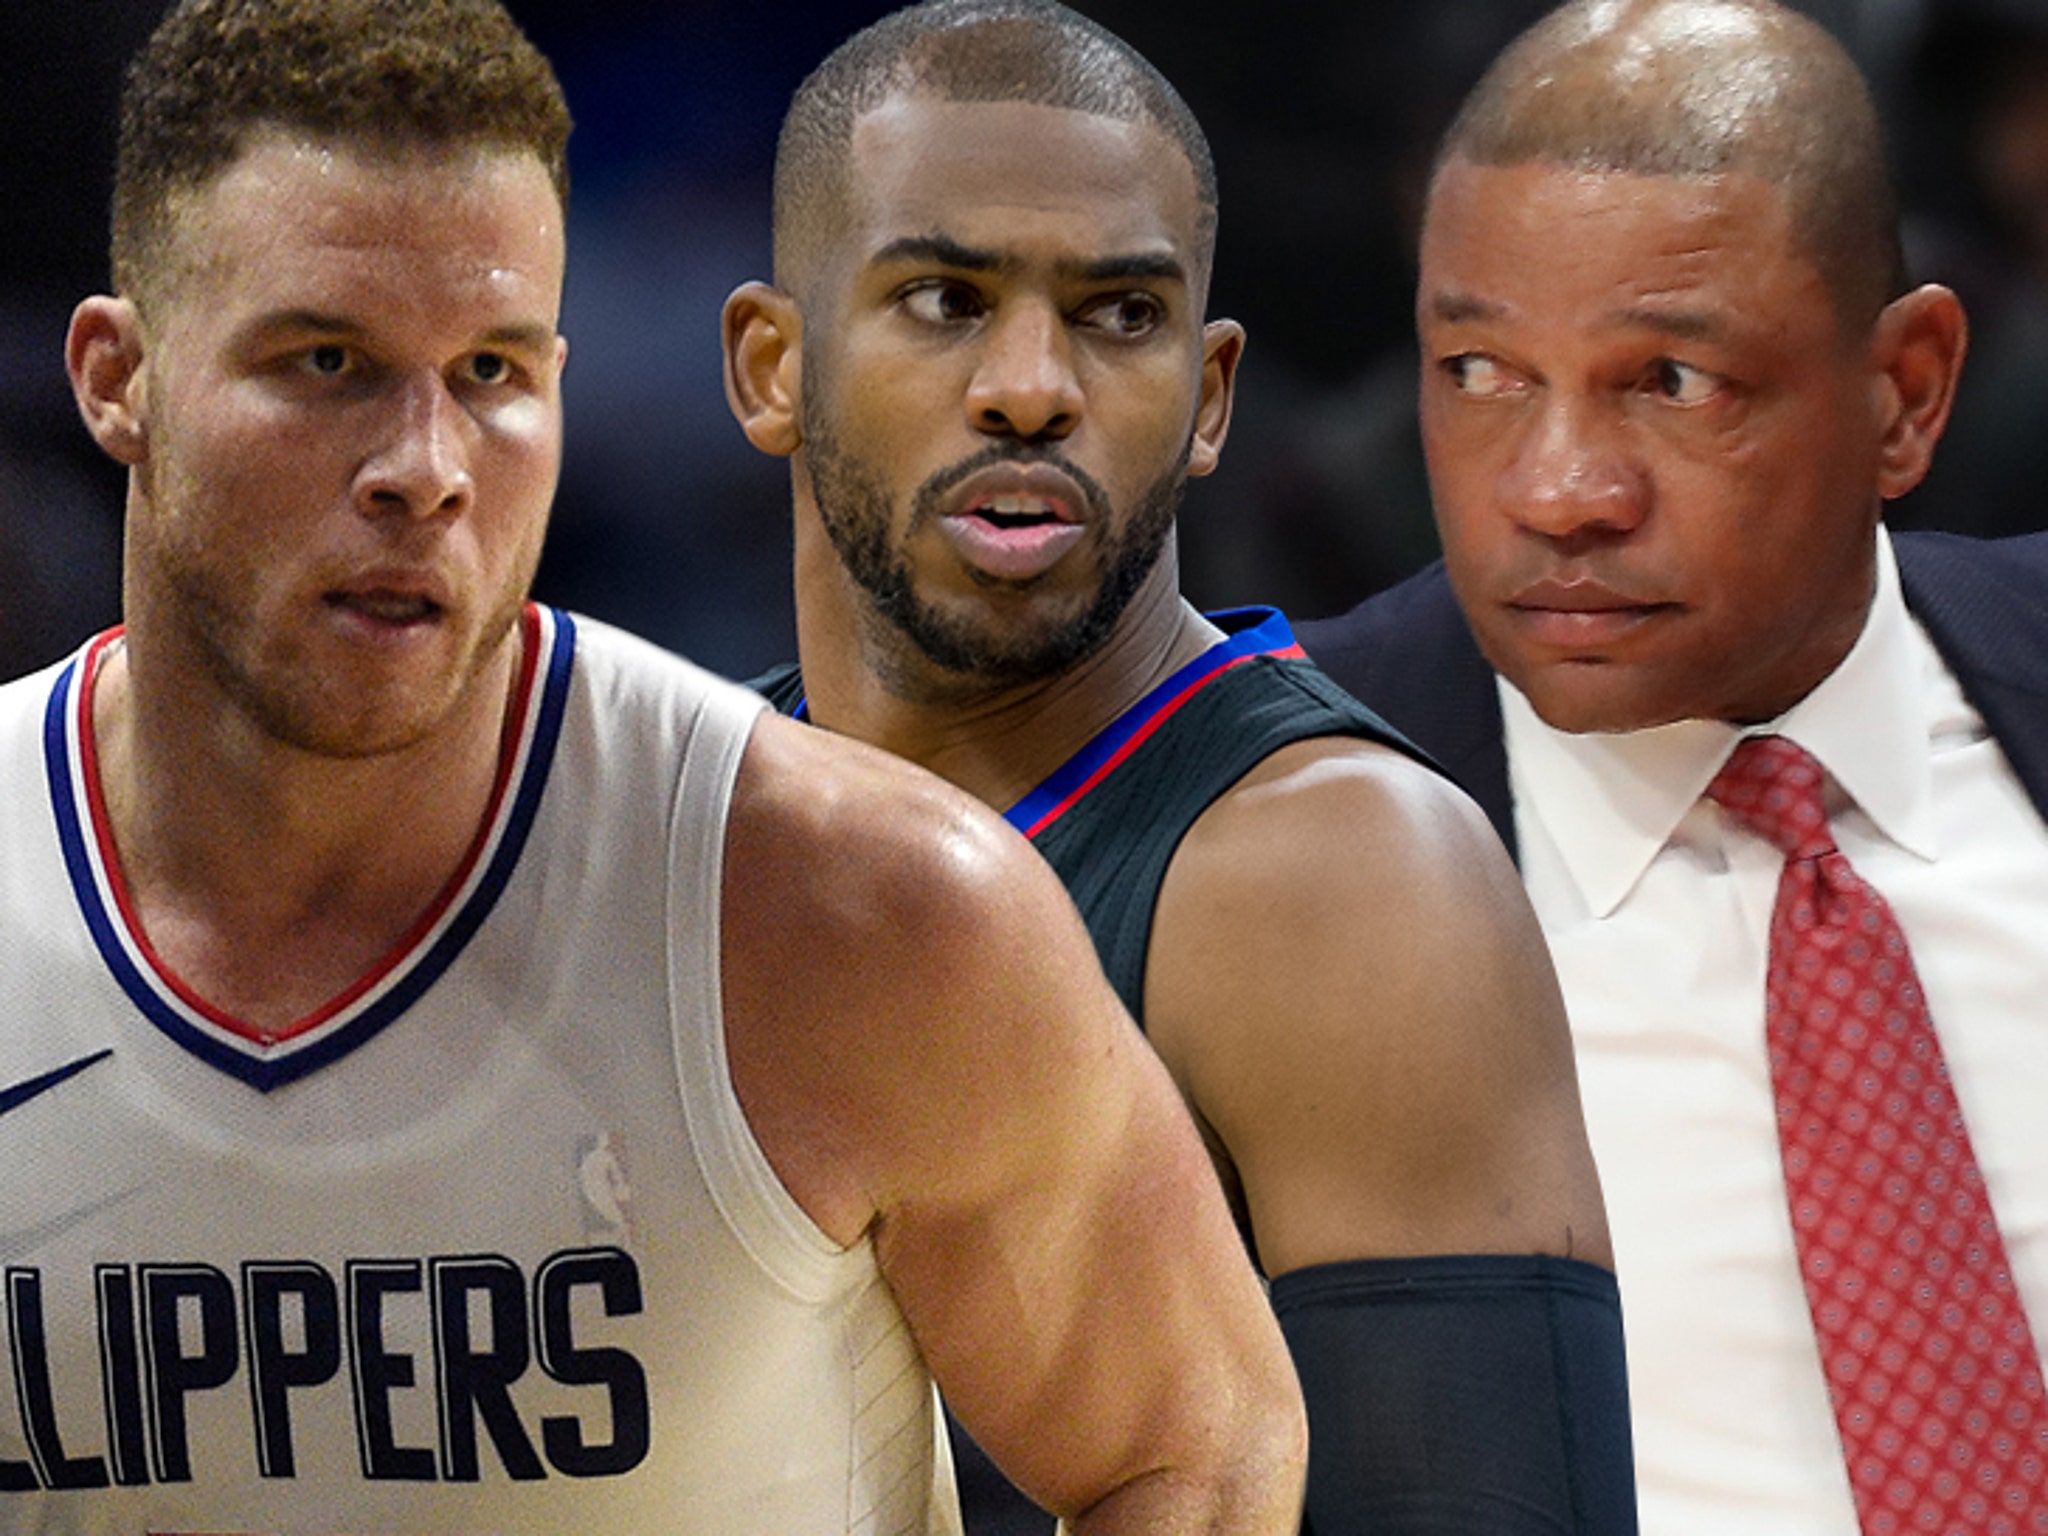 Clipper teammates and leaders Chris Paul and Blake Griffin in